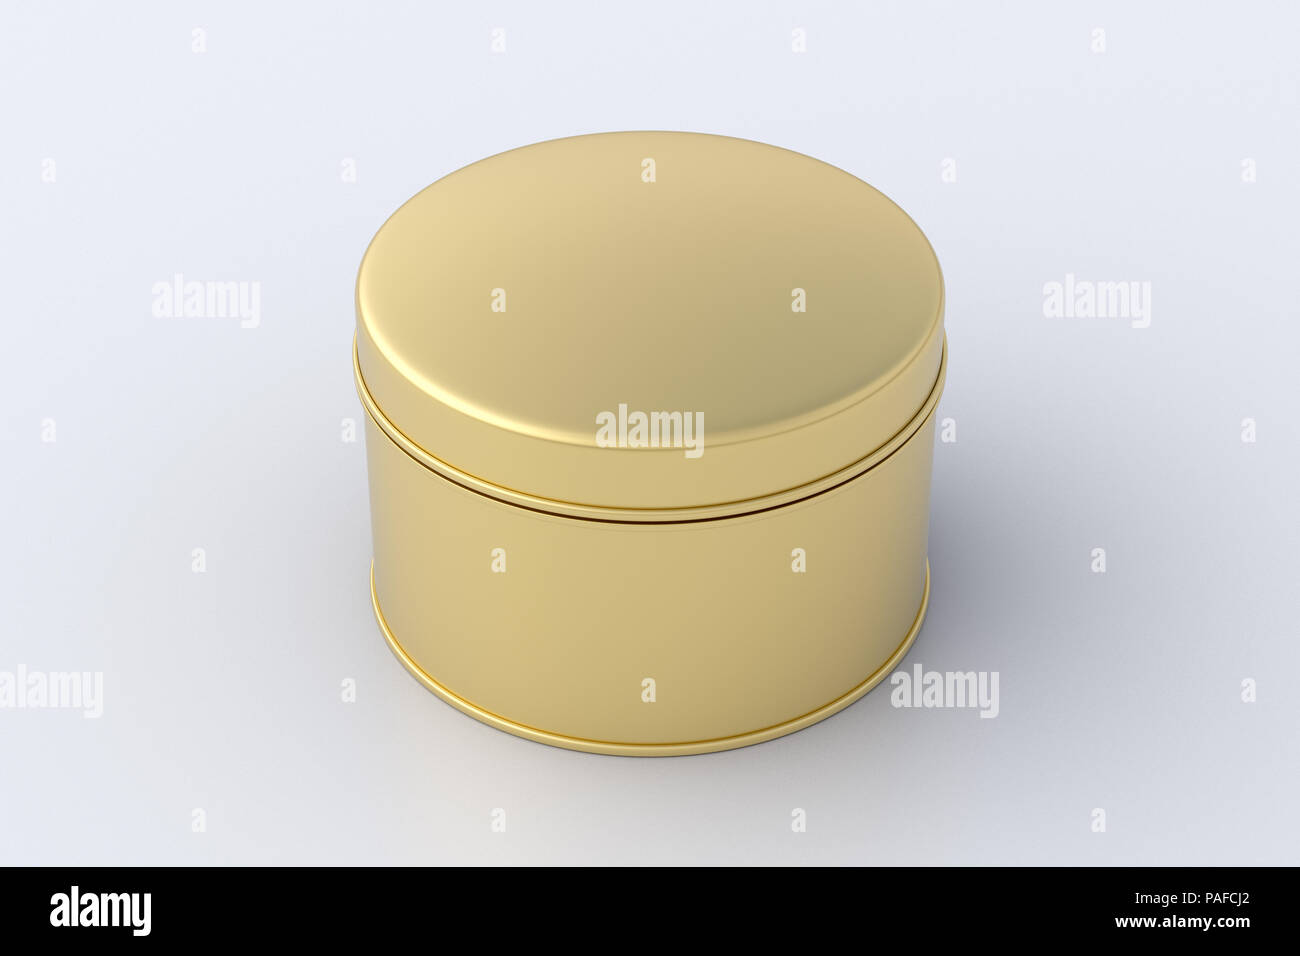 Blank Closed Gold Round Tin Container Box On White Background Package Mockup With Clipping Path Around Container 3d Illustration Stock Photo Alamy